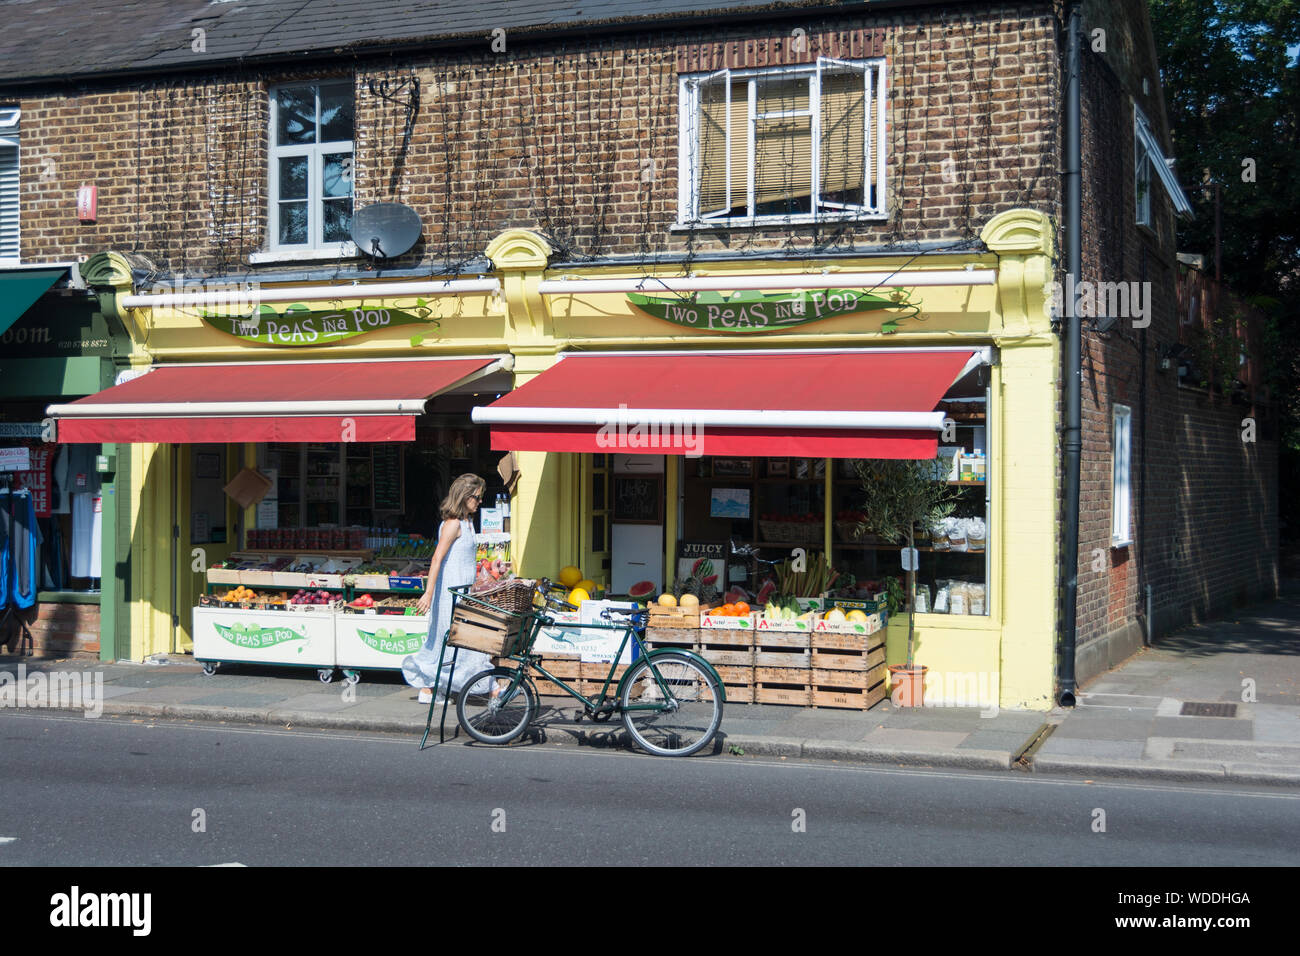 Two Peas in a Pod Fruiterers and Greengrocers in Barnes, London, UK Stock Photo